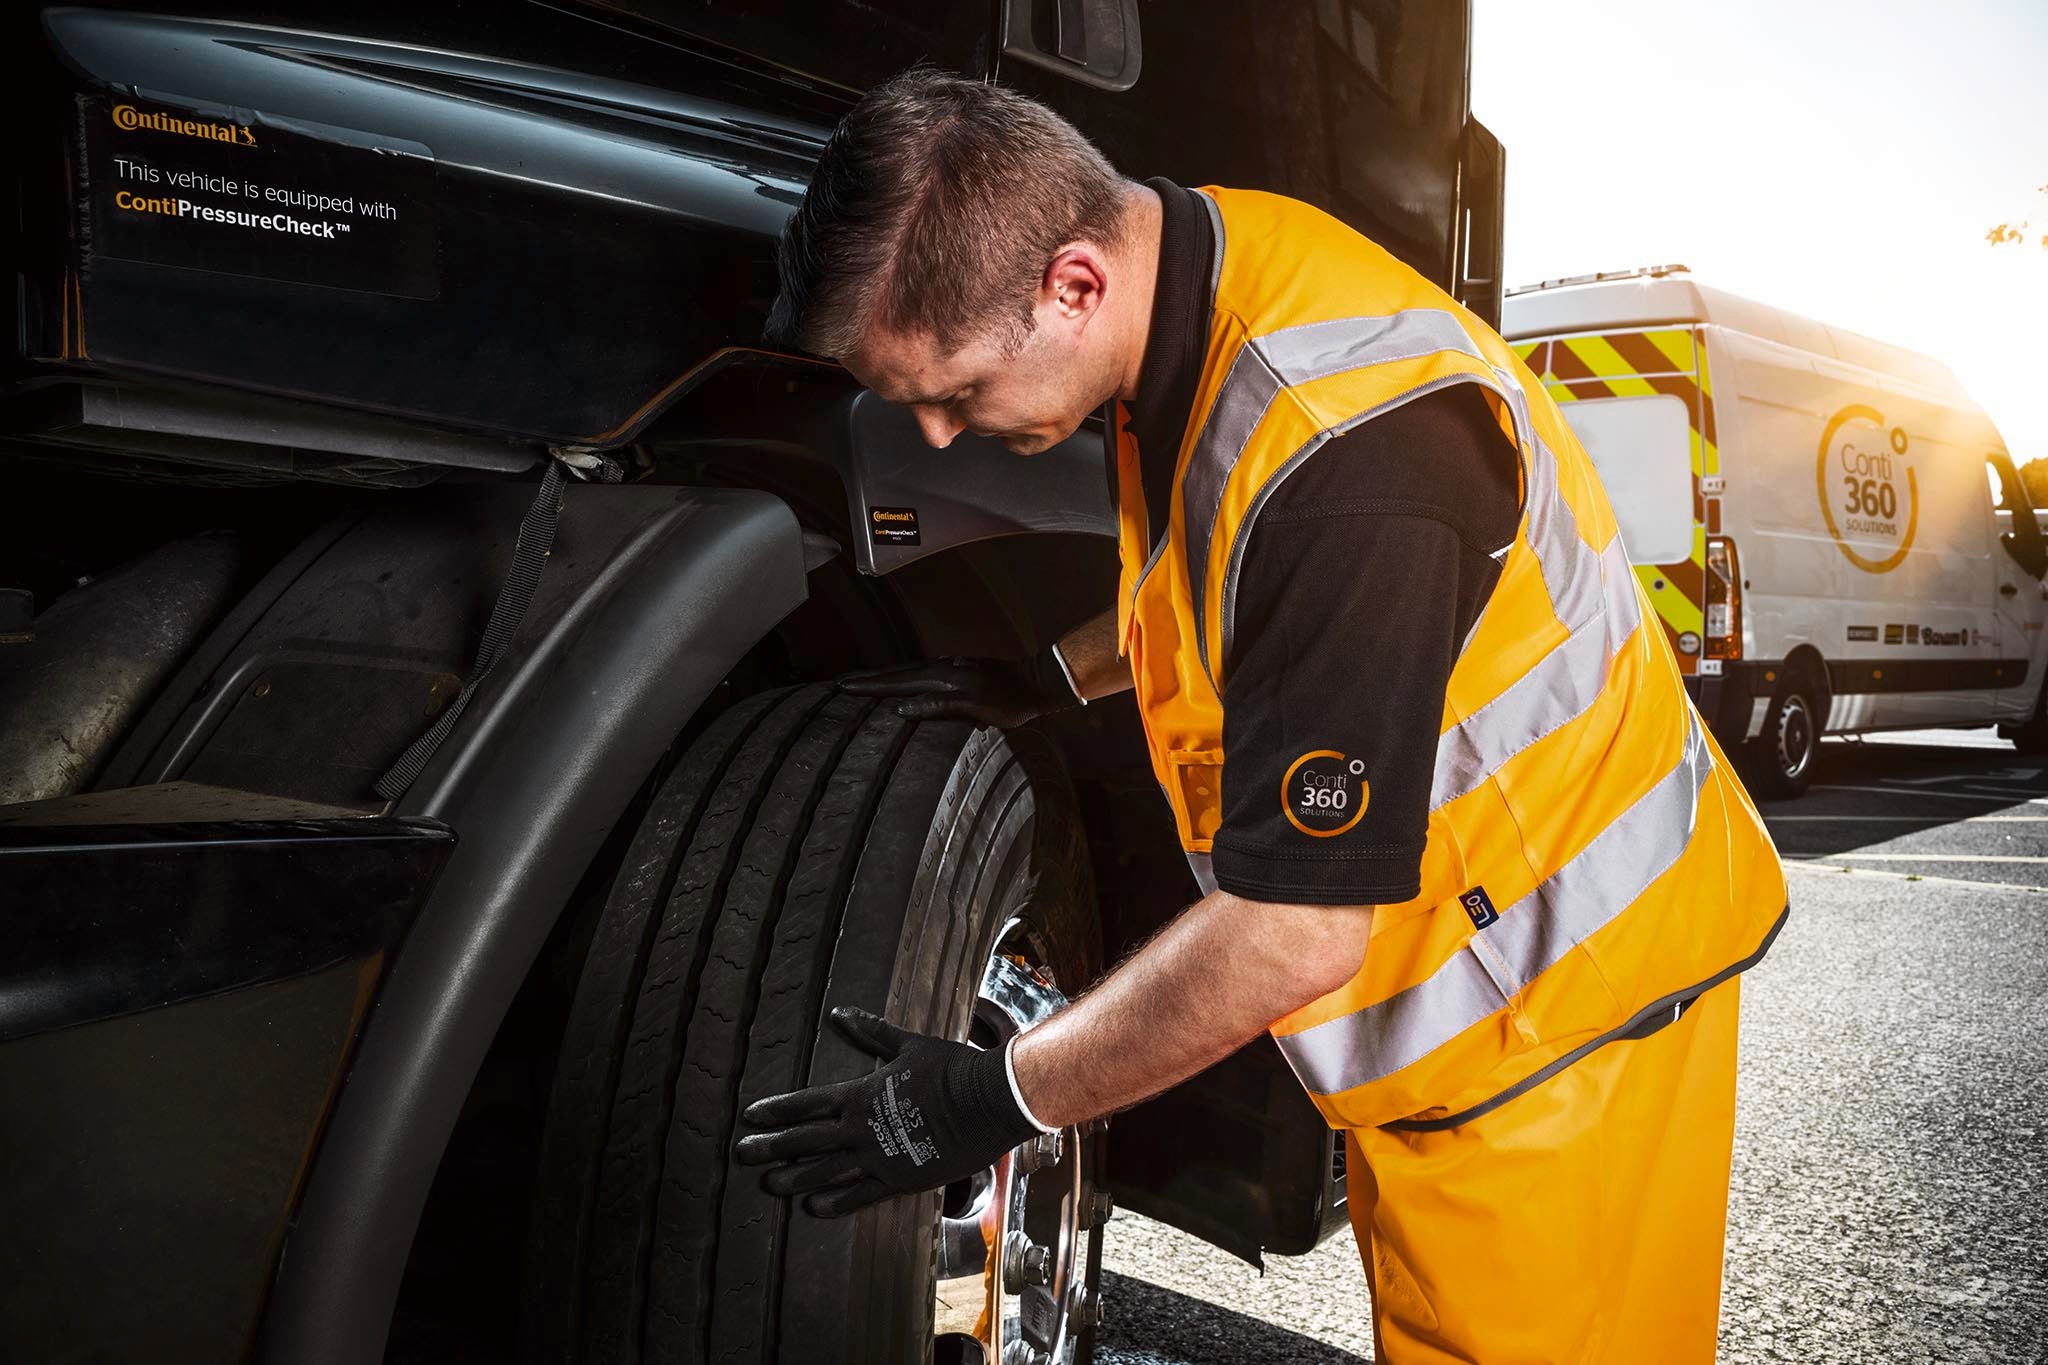 A man from the Conti360 Breakdown service inspects a truck tire